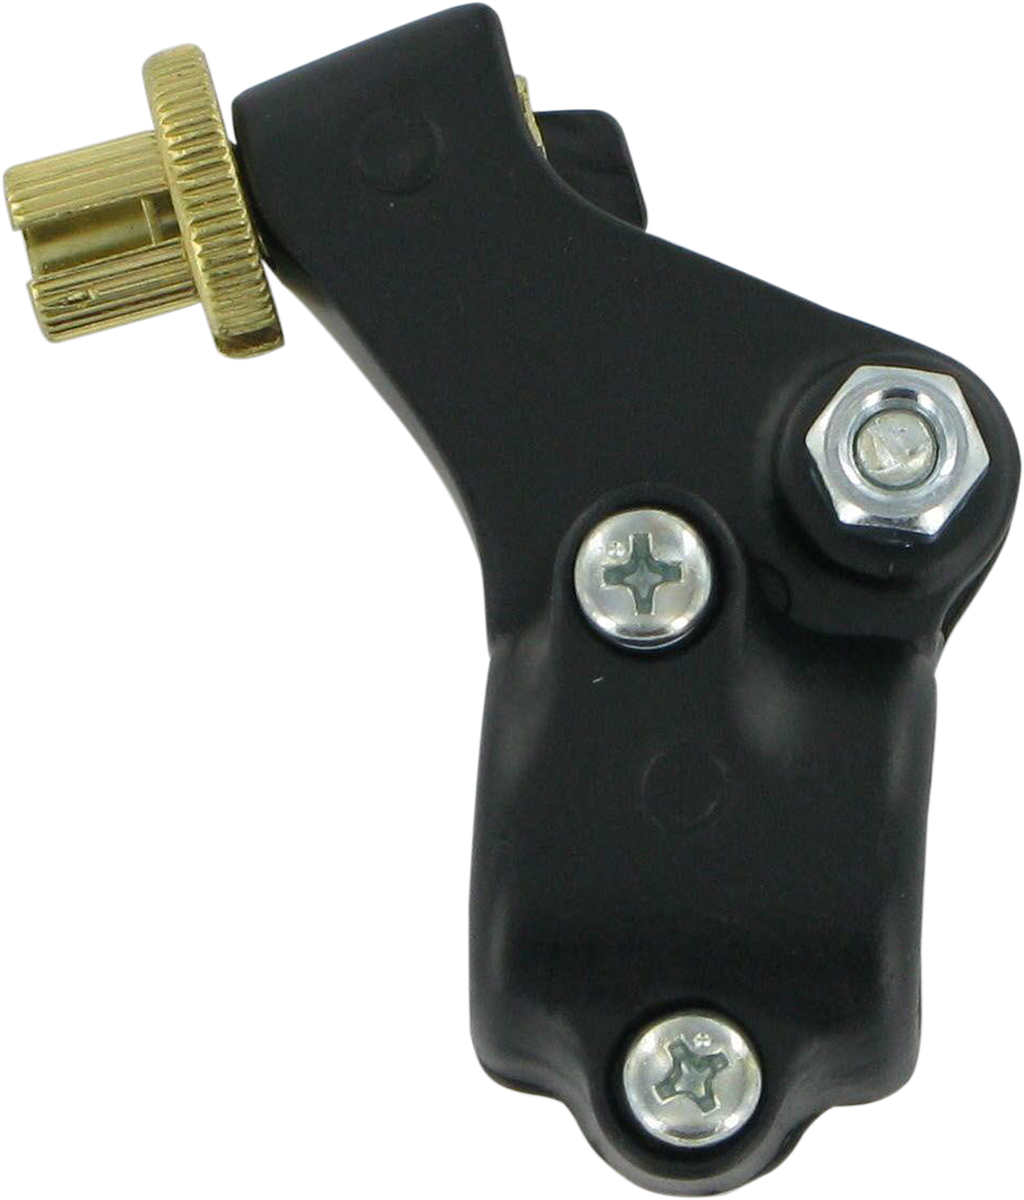 PARTS UNLIMITED TWO-PIECE LEVER HOLDERS LEVER HOLDER LH-HONDA